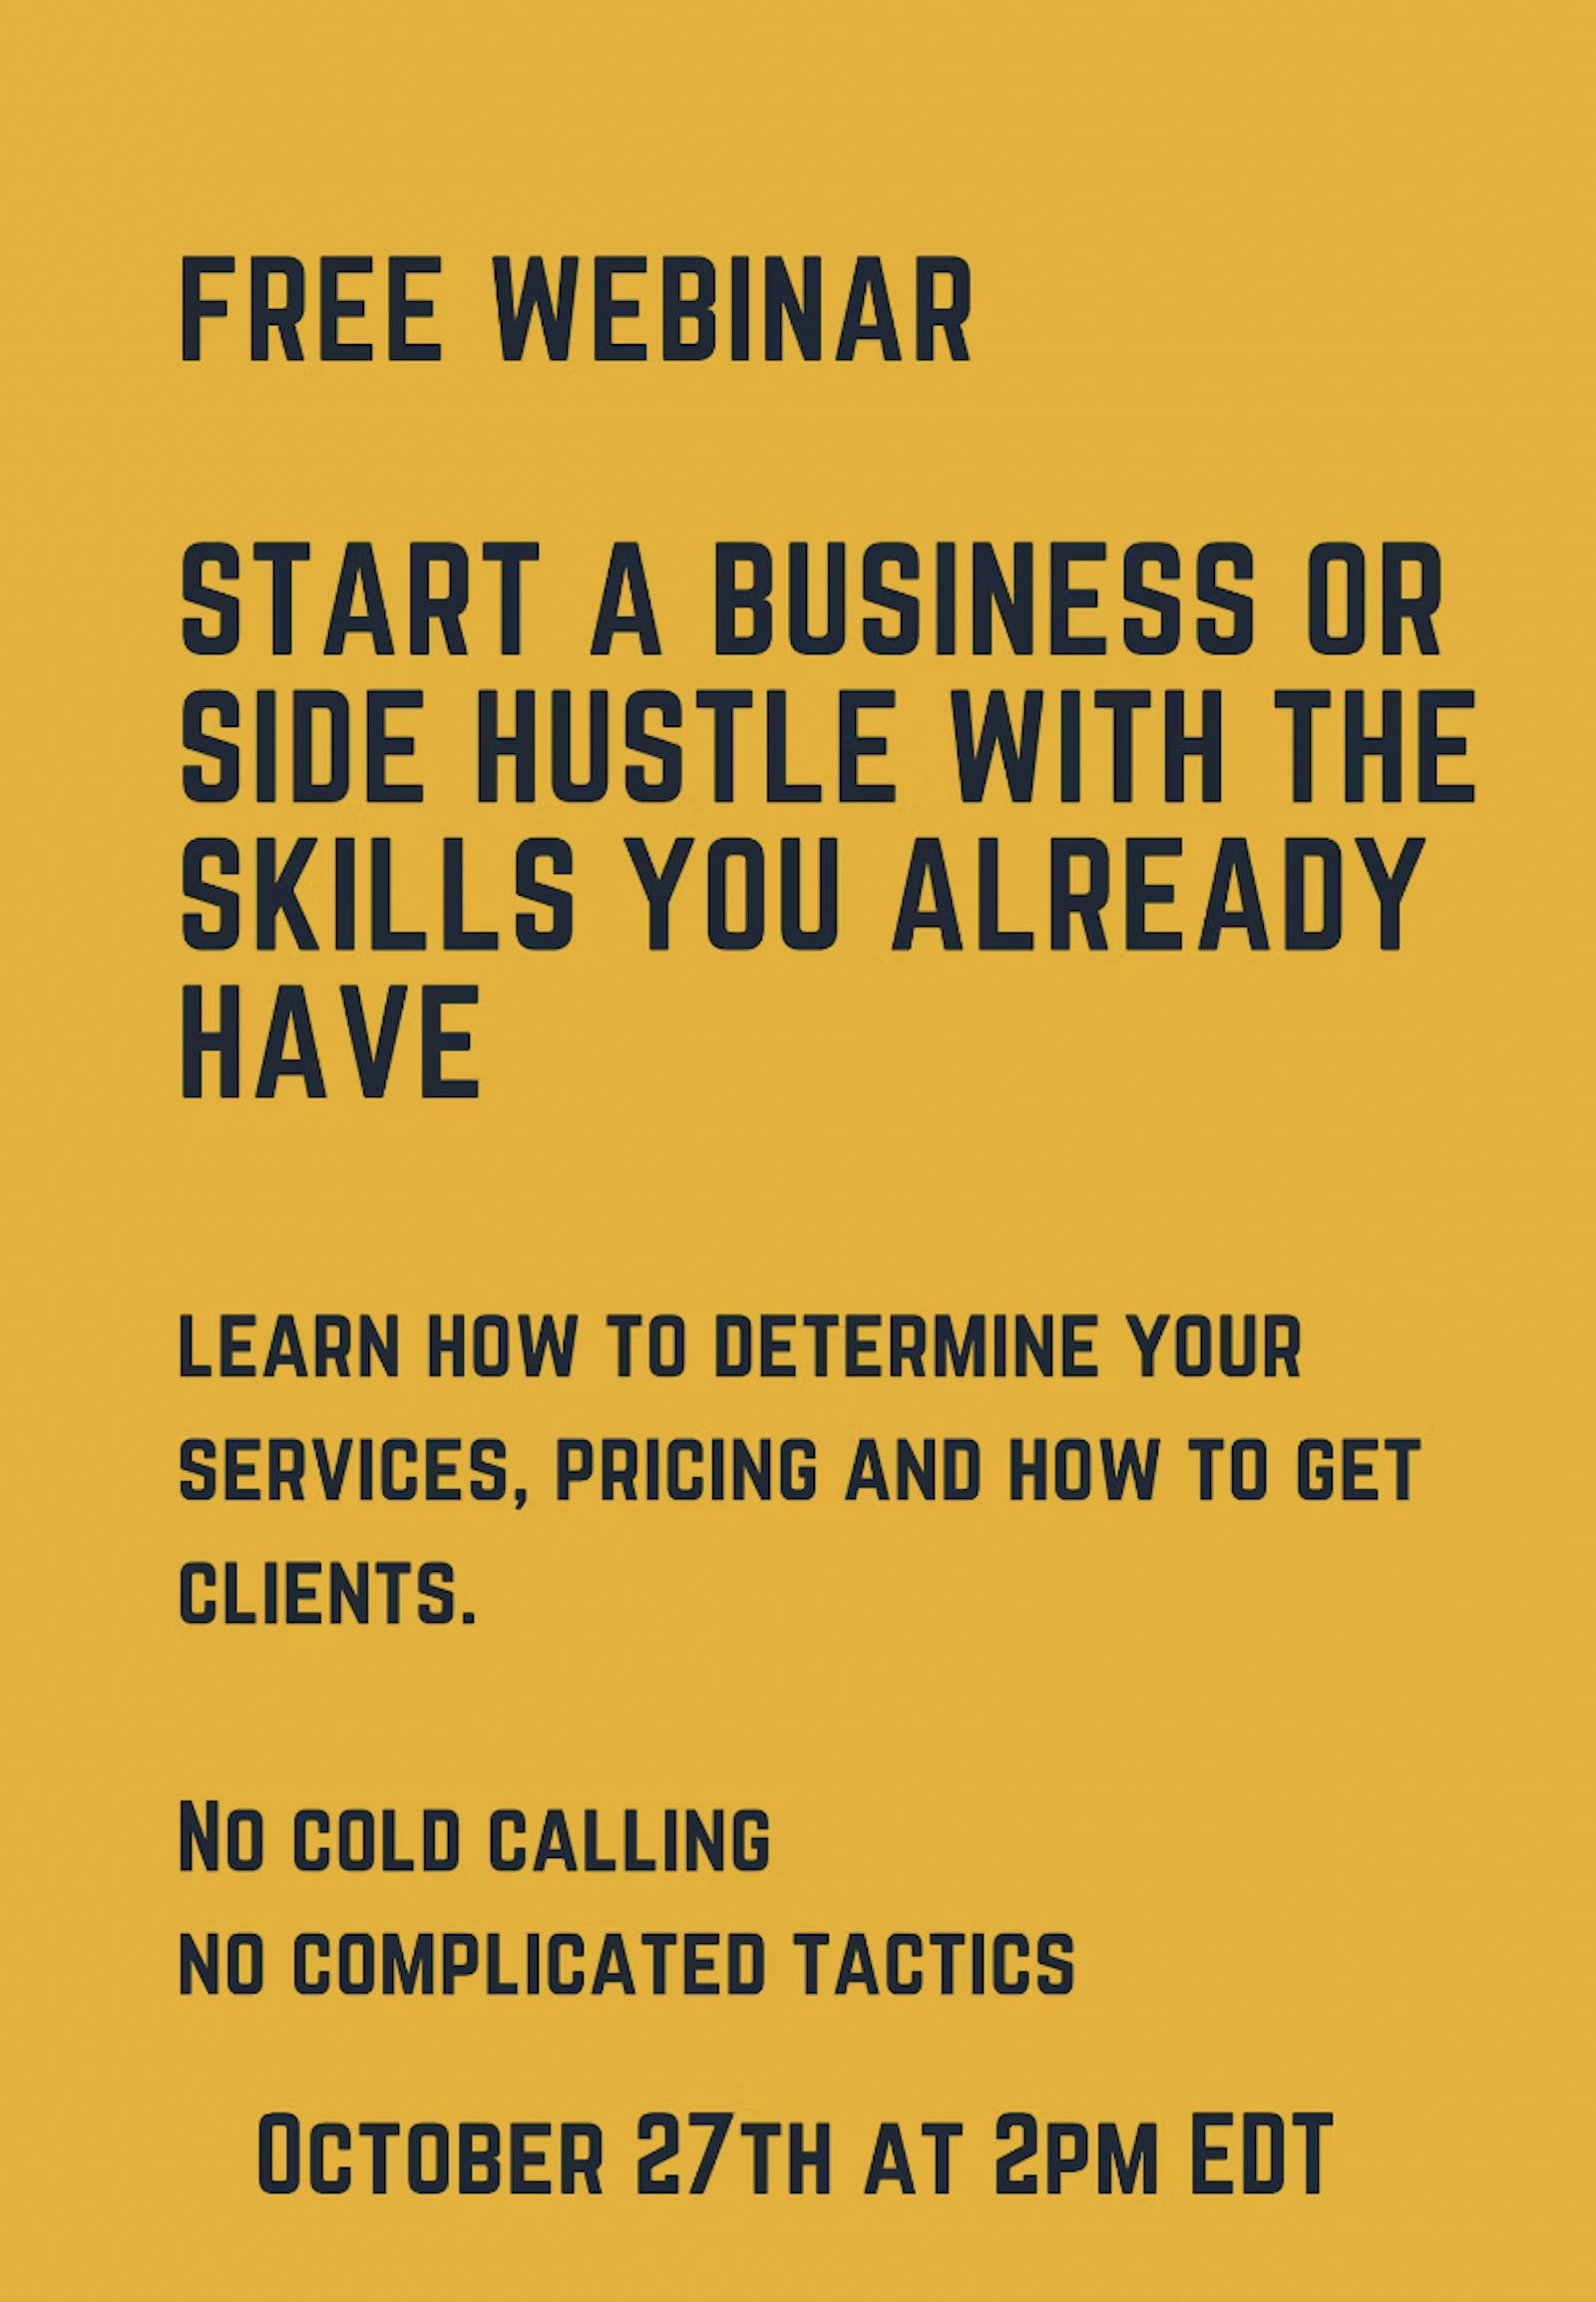 Start a Business or Side Hustle with the Skills You Already Have